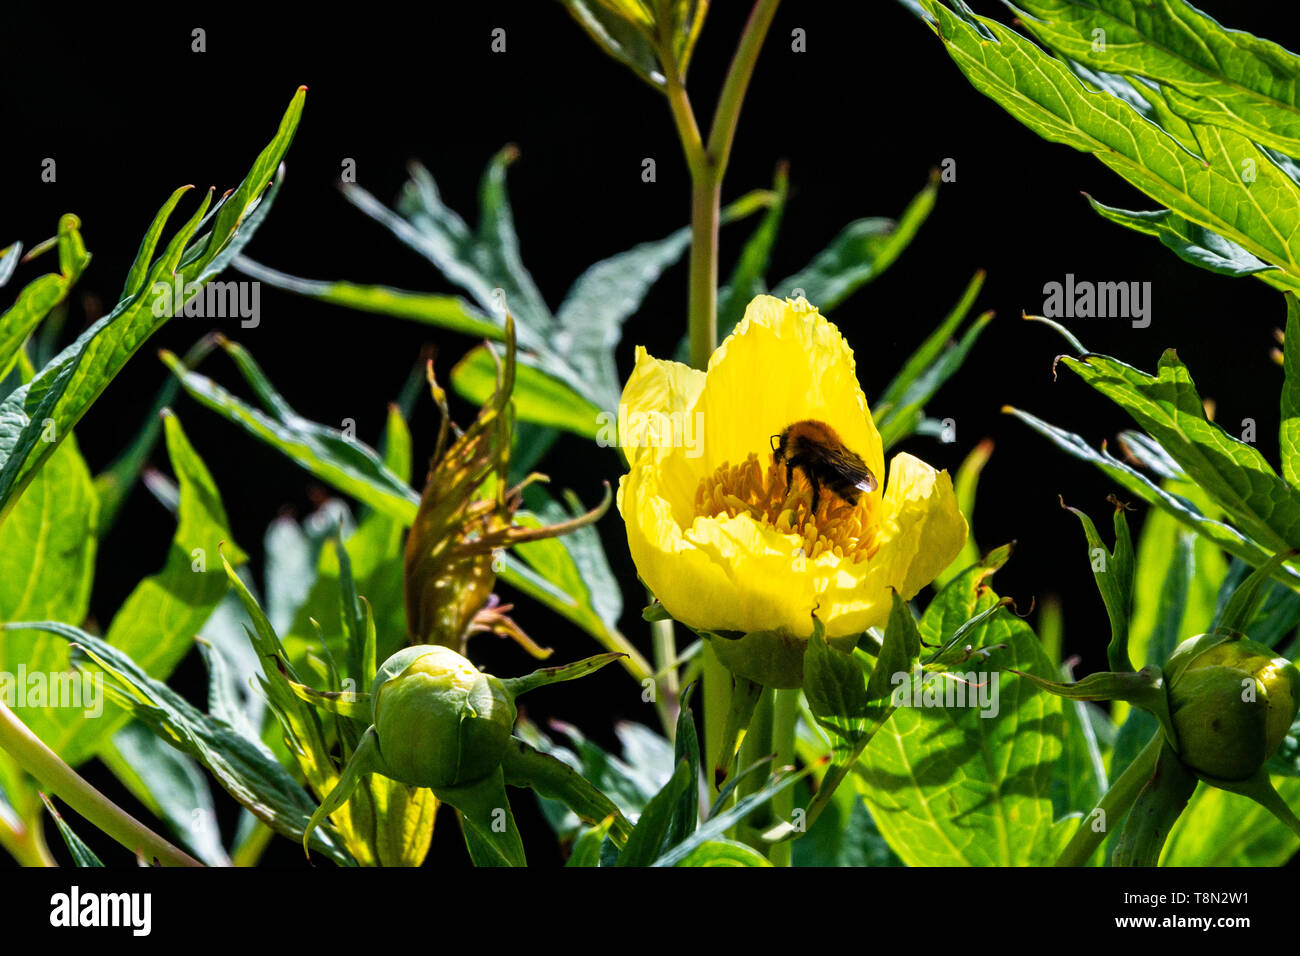 A bumble bee on the flower of a Tibetan tree peony (Paeonia ludlowii) Stock Photo